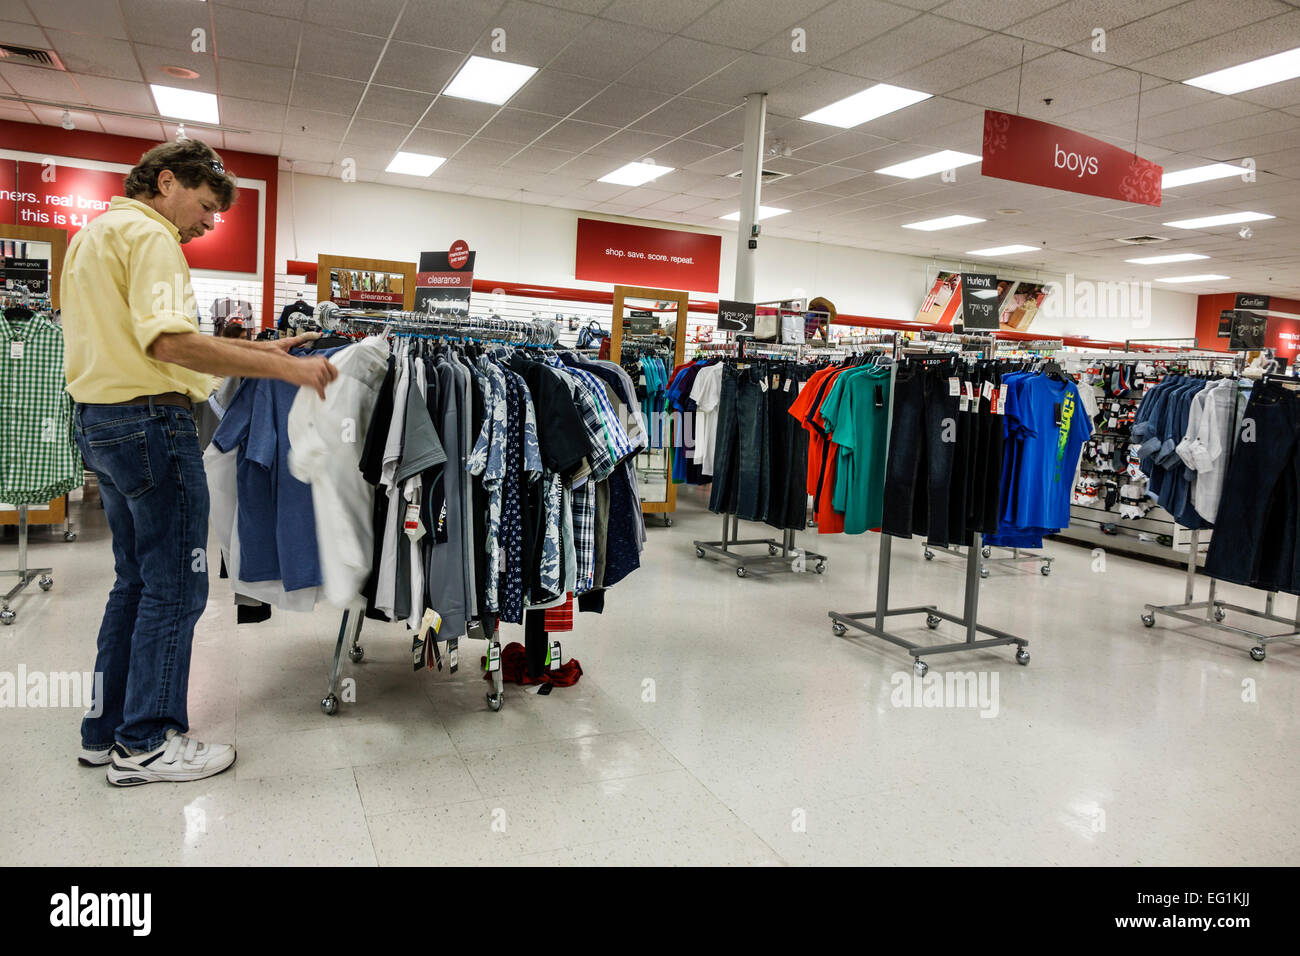 Mediabakery - Photo by Age Fotostock - Florida, West Palm Beach, TJ Maxx,  discount store, shopping, inside, men´s, clothing, dress shirts, ties,  sale, display, Tommy Hilfiger